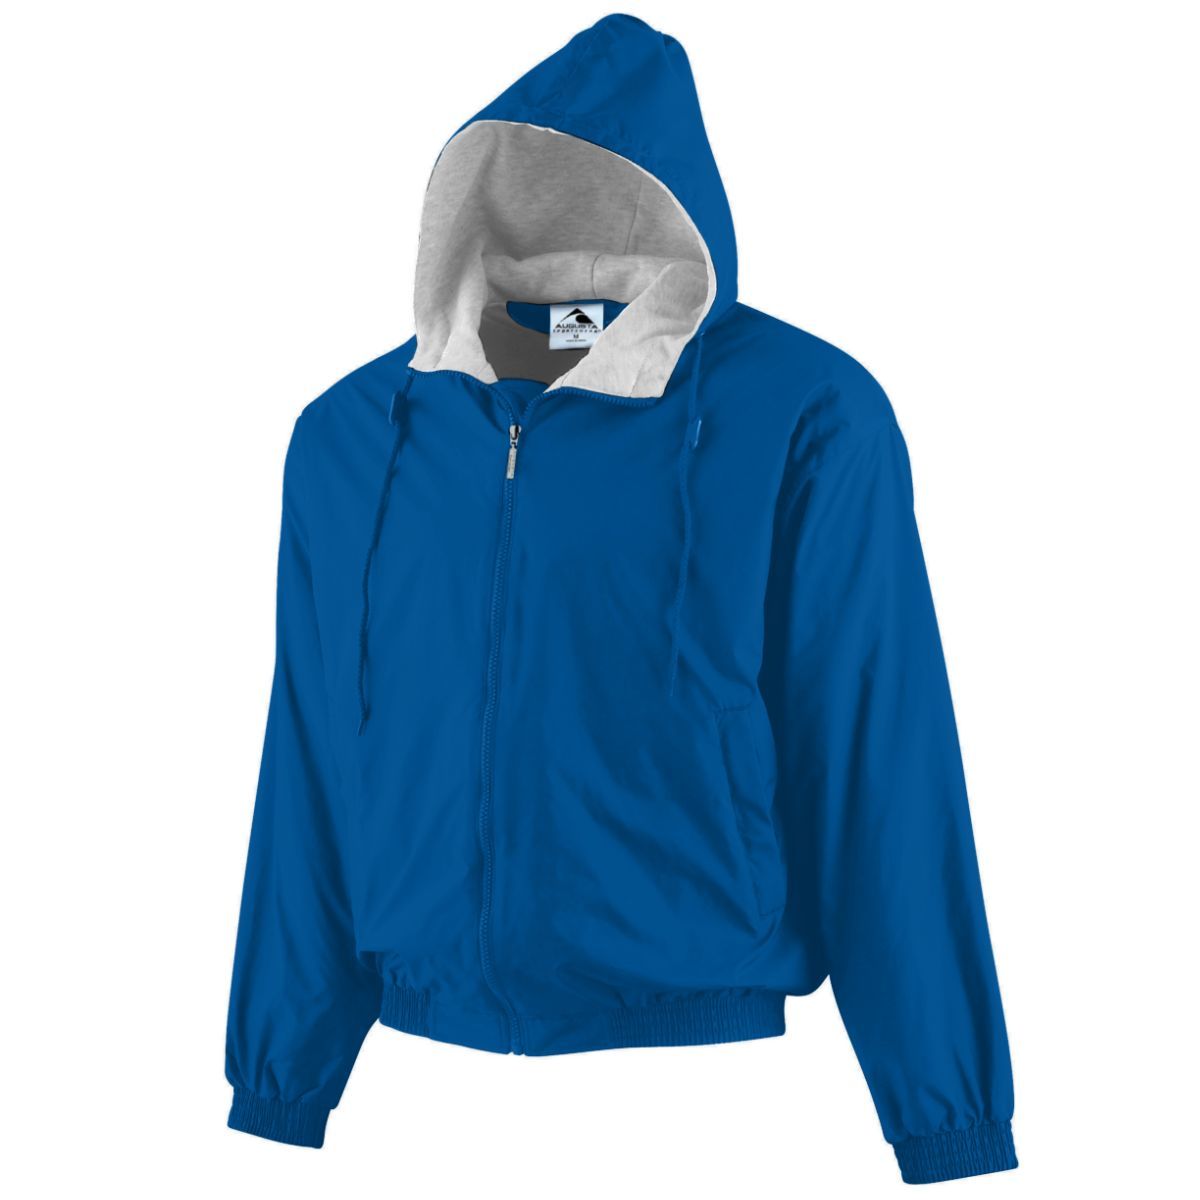 Augusta Sportswear Youth Hooded Taffeta Jacket/Fleece Lined in Royal  -Part of the Youth, Youth-Jacket, Augusta-Products, Outerwear product lines at KanaleyCreations.com